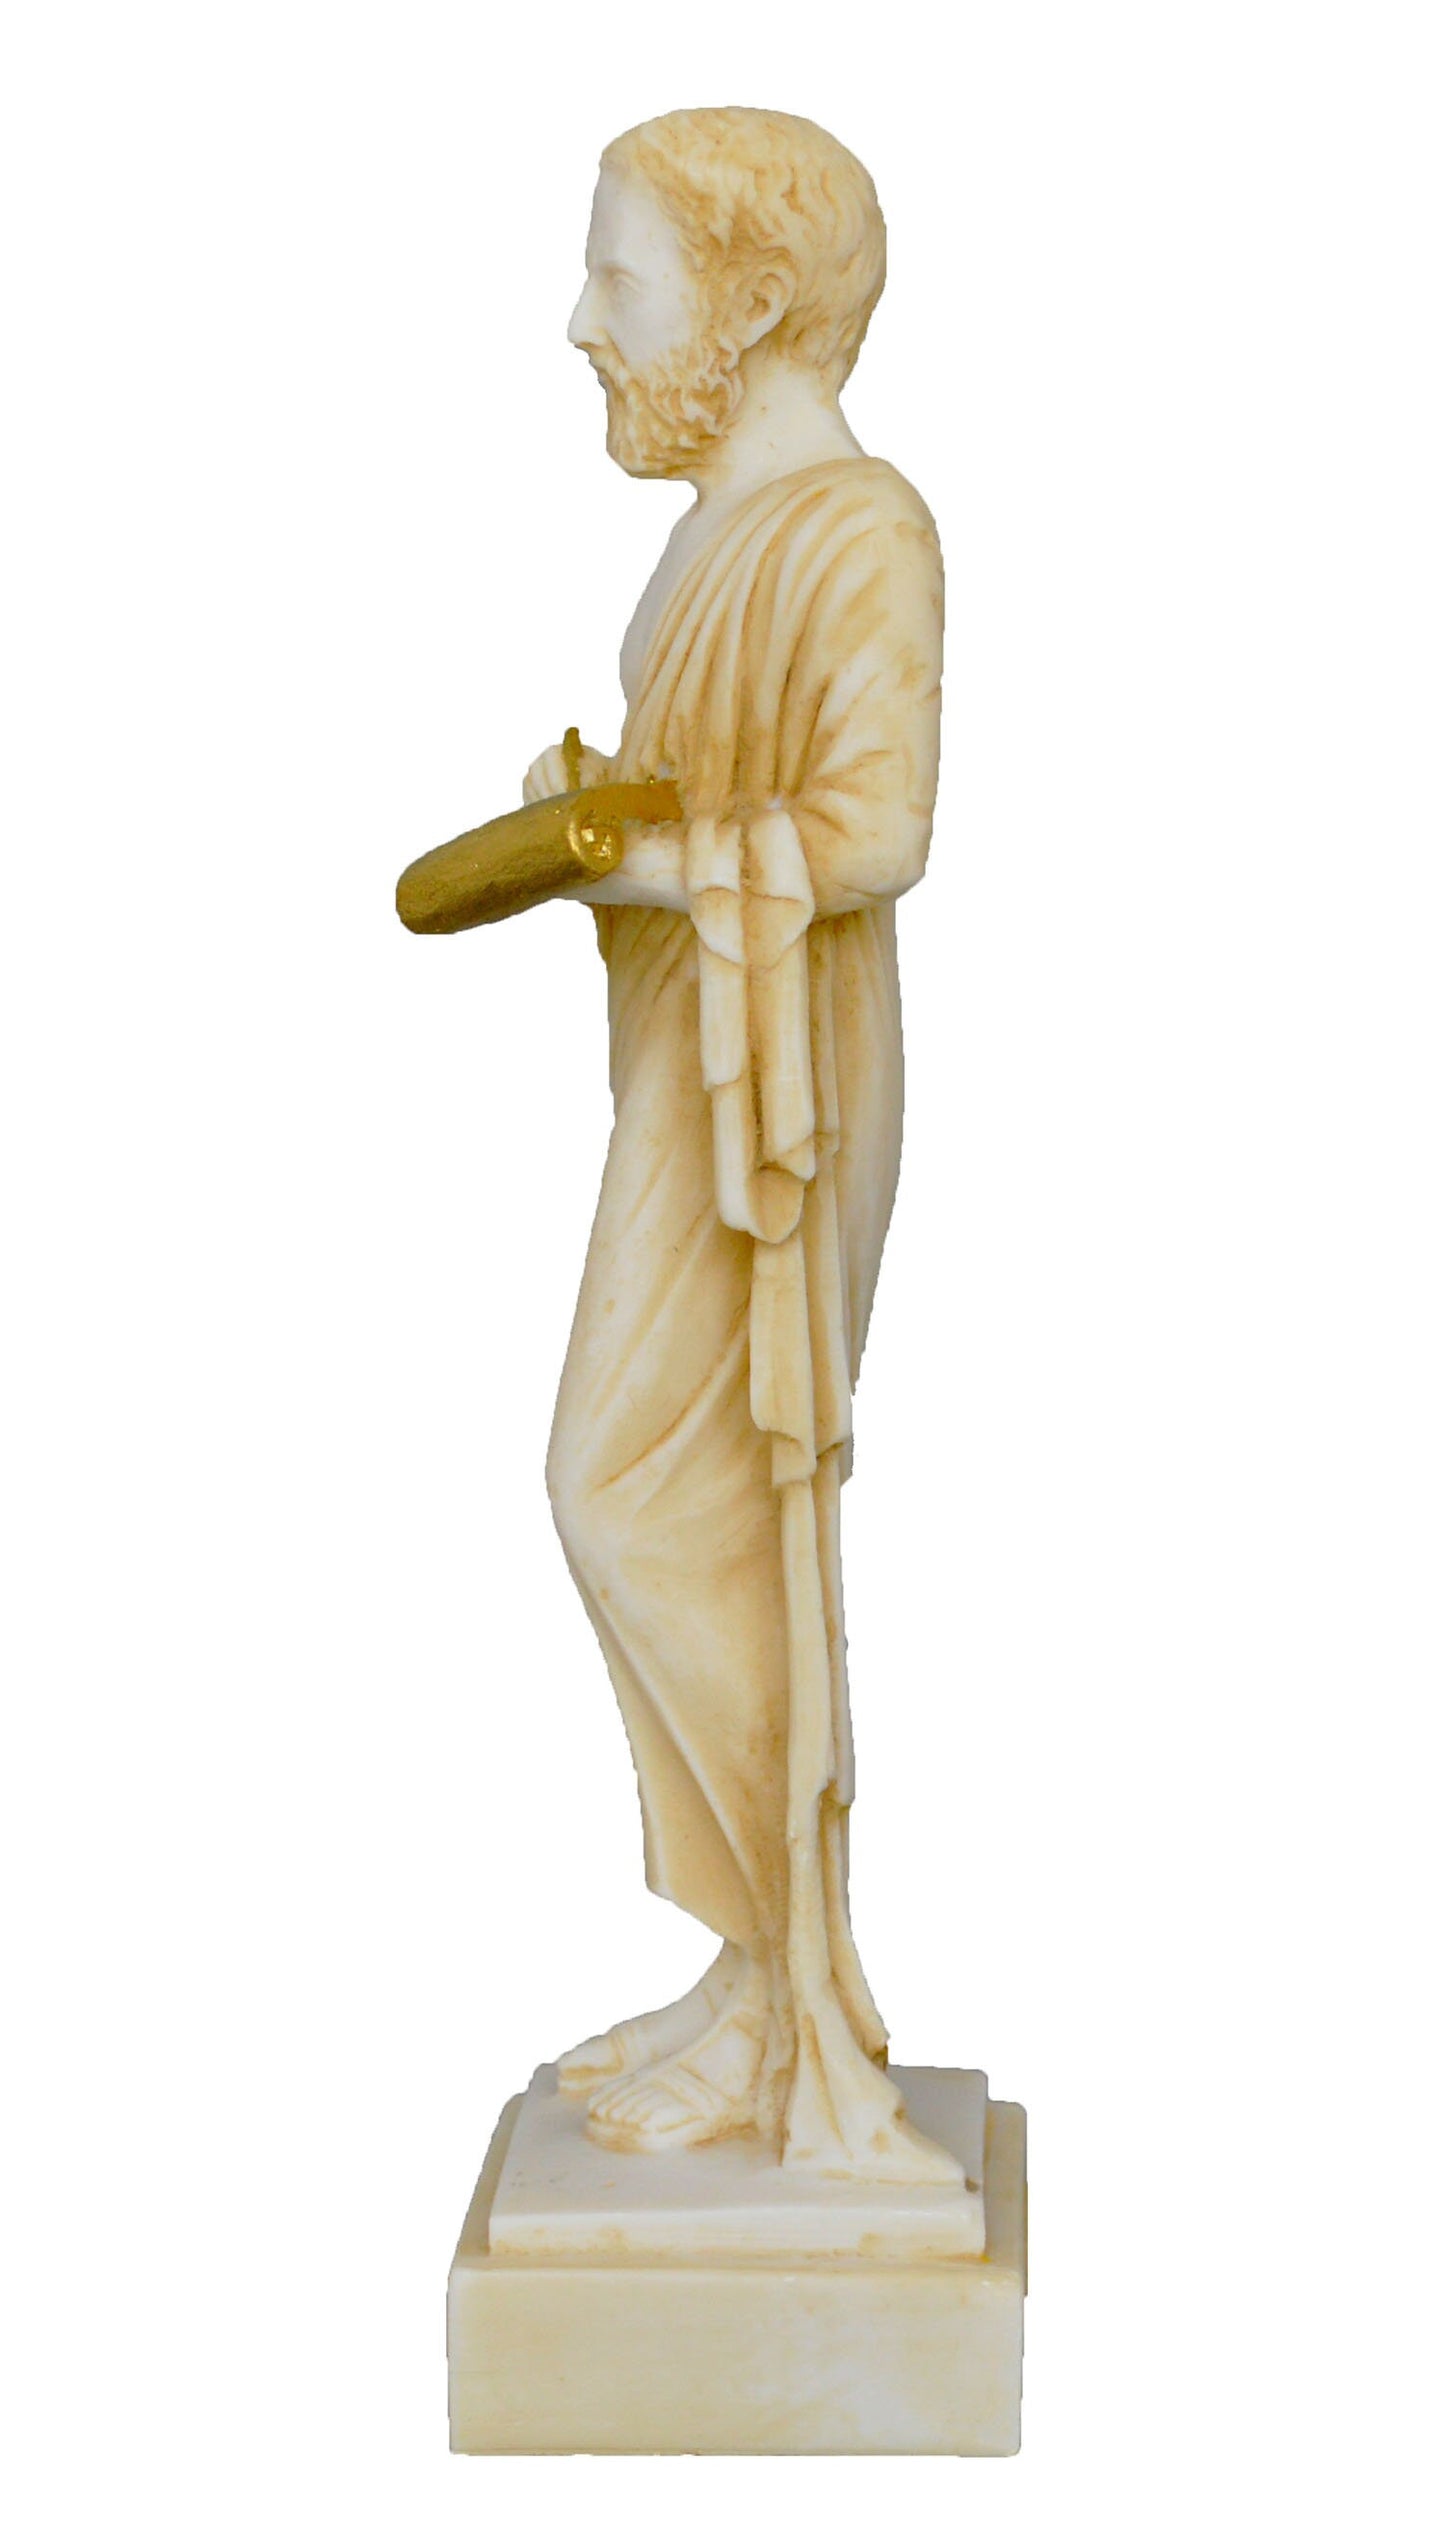 Herodotus of Halicarnassus - 484–425 BC - Ancient Greek Historian and Geographer - Greco-Persian Wars - Aged Alabaster Statue